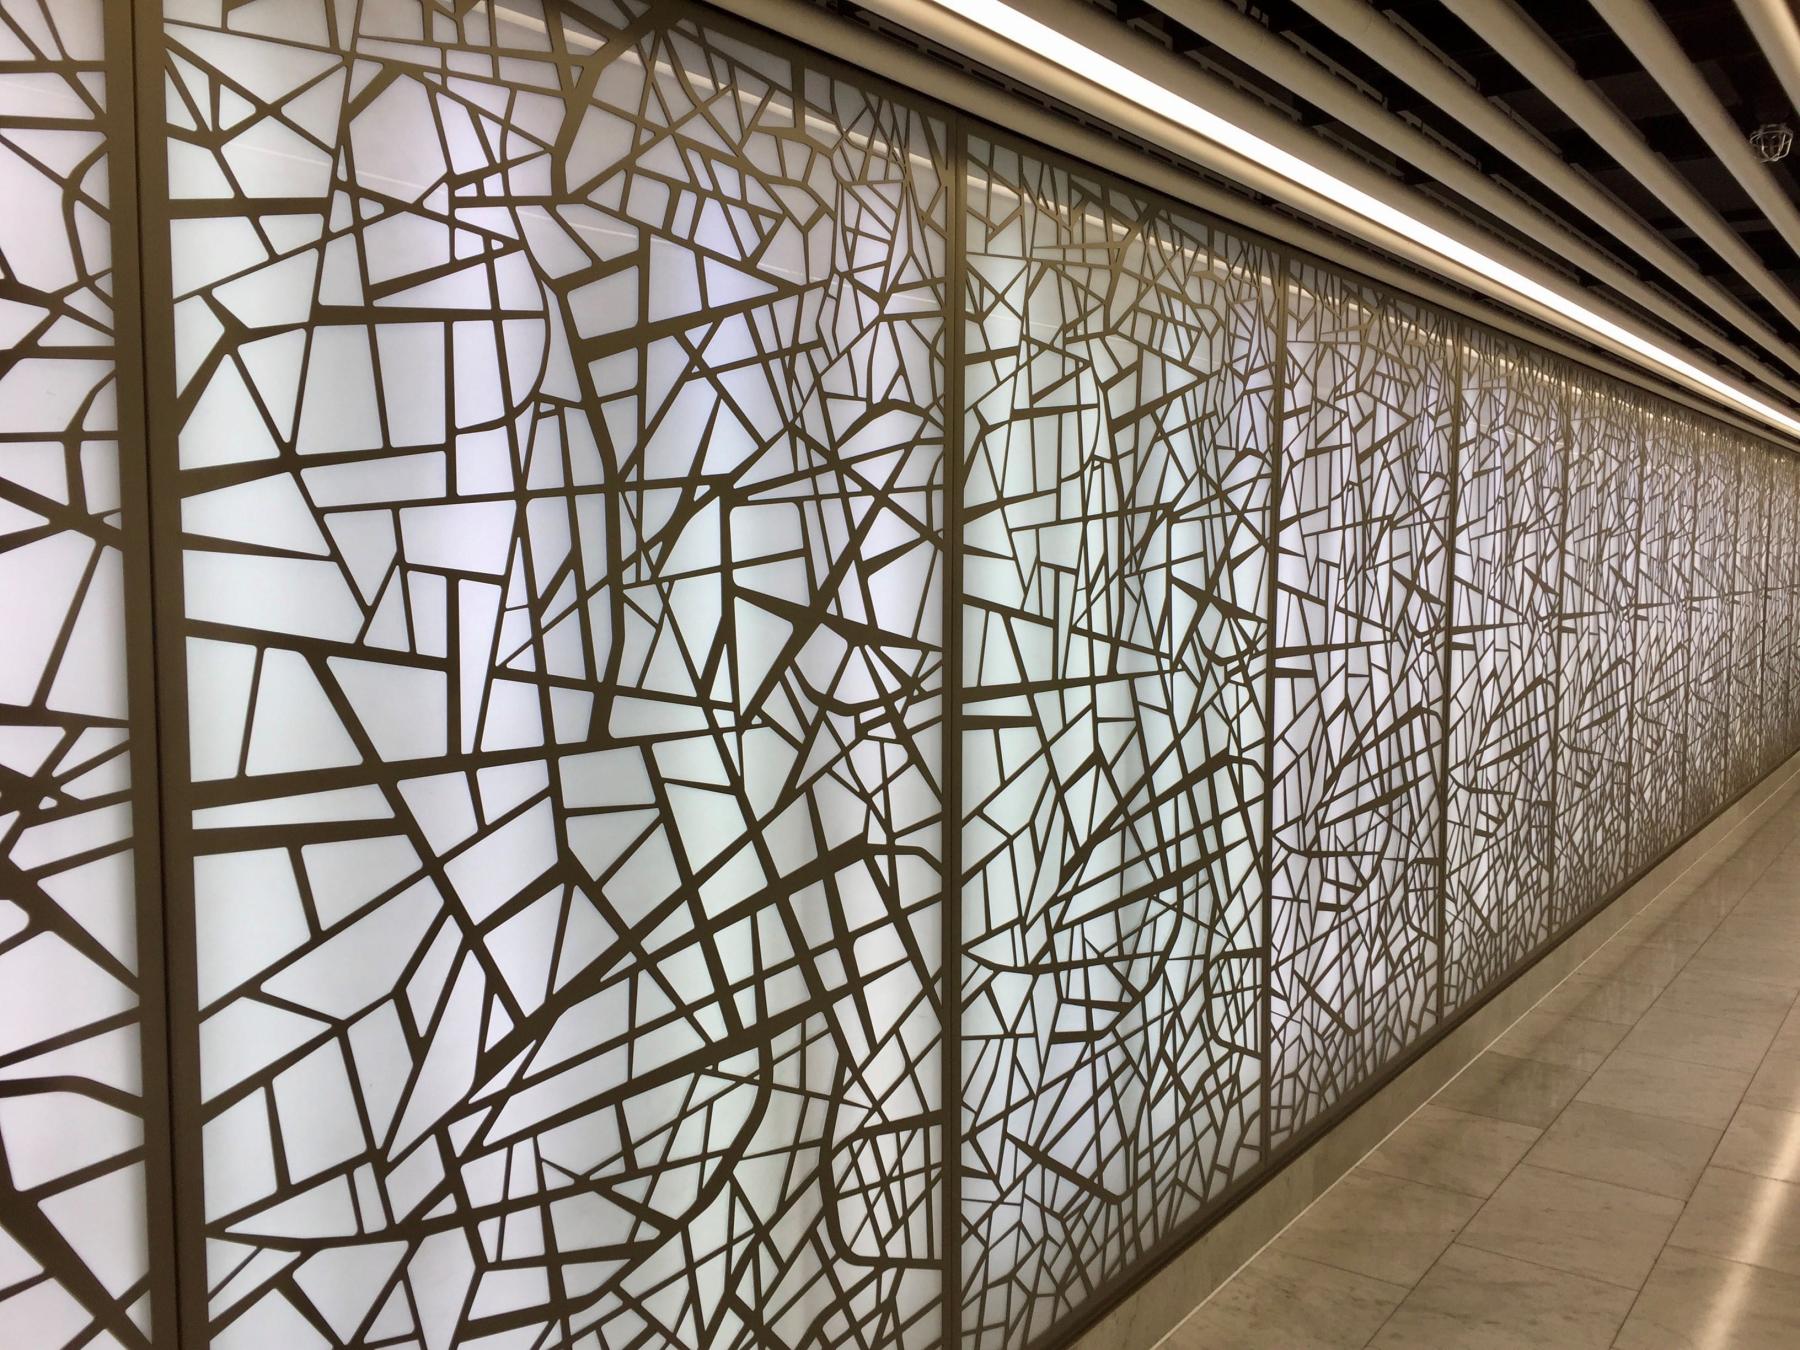 Abstract wall in a subway